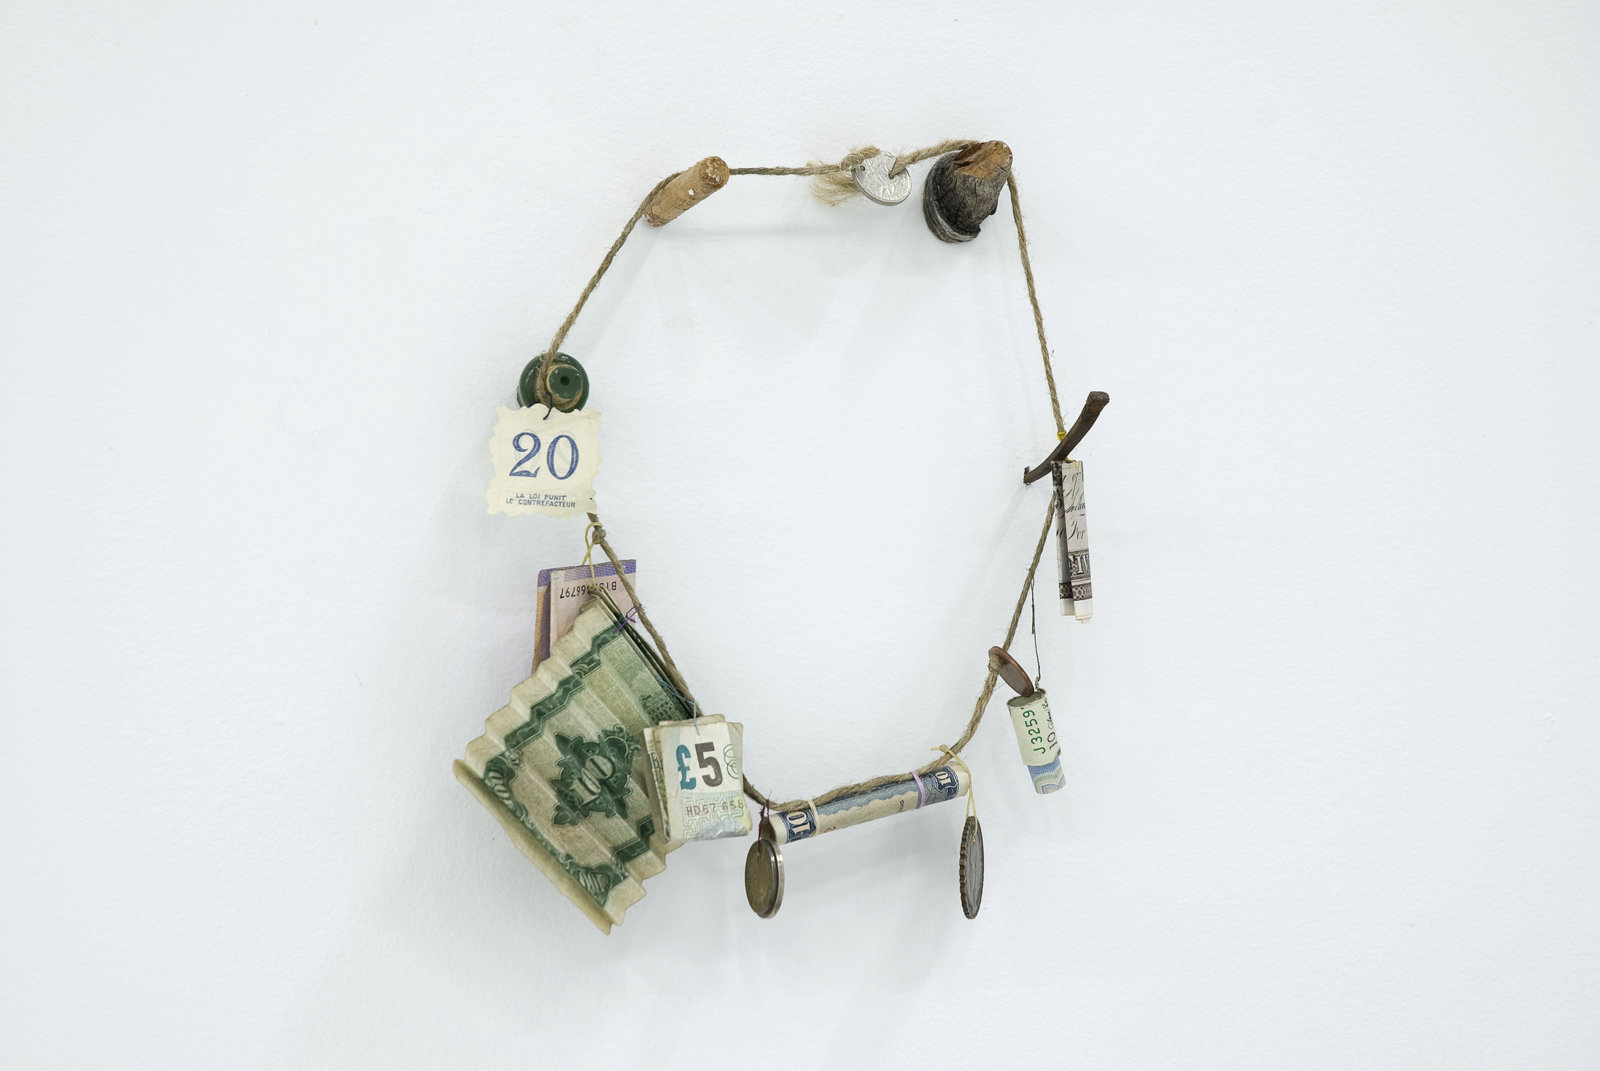 Ashes Withyman, Necklace from Uncertain Pilgrimage, 2006-2009, string, thread, found wood, nail, various past and present currencies, 9 x 8 x 2 in. (24 x 20 x 6 cm)